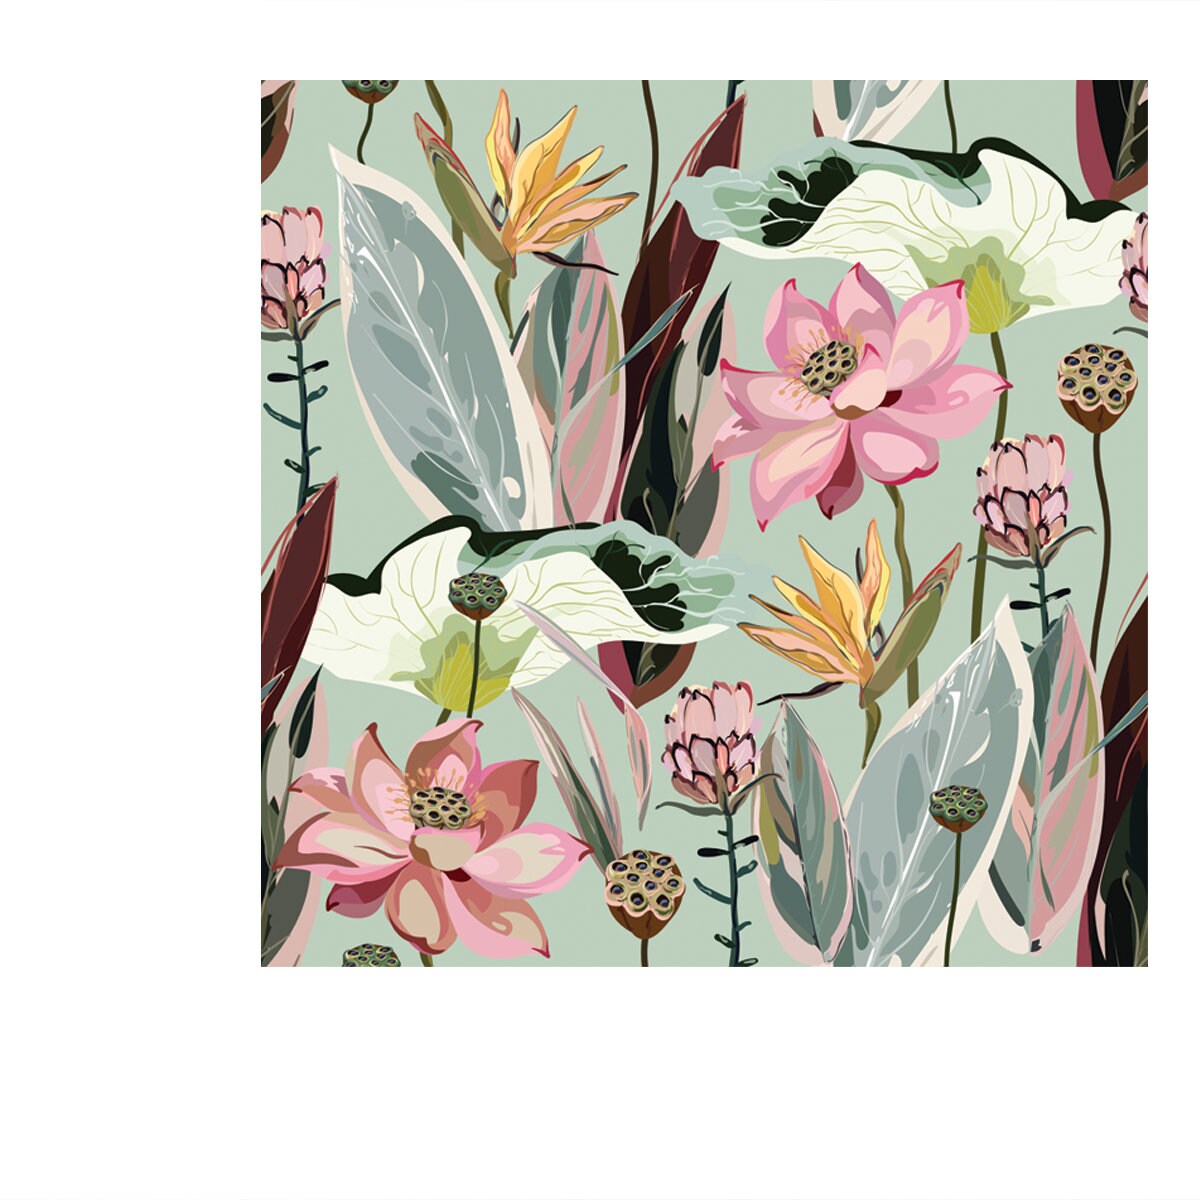 Large Flowers, Inflorescences, Buds and Lotus Leaves, Strelitzia and Proteus on a Light Sage Green Background Wallpaper Bedroom Mural